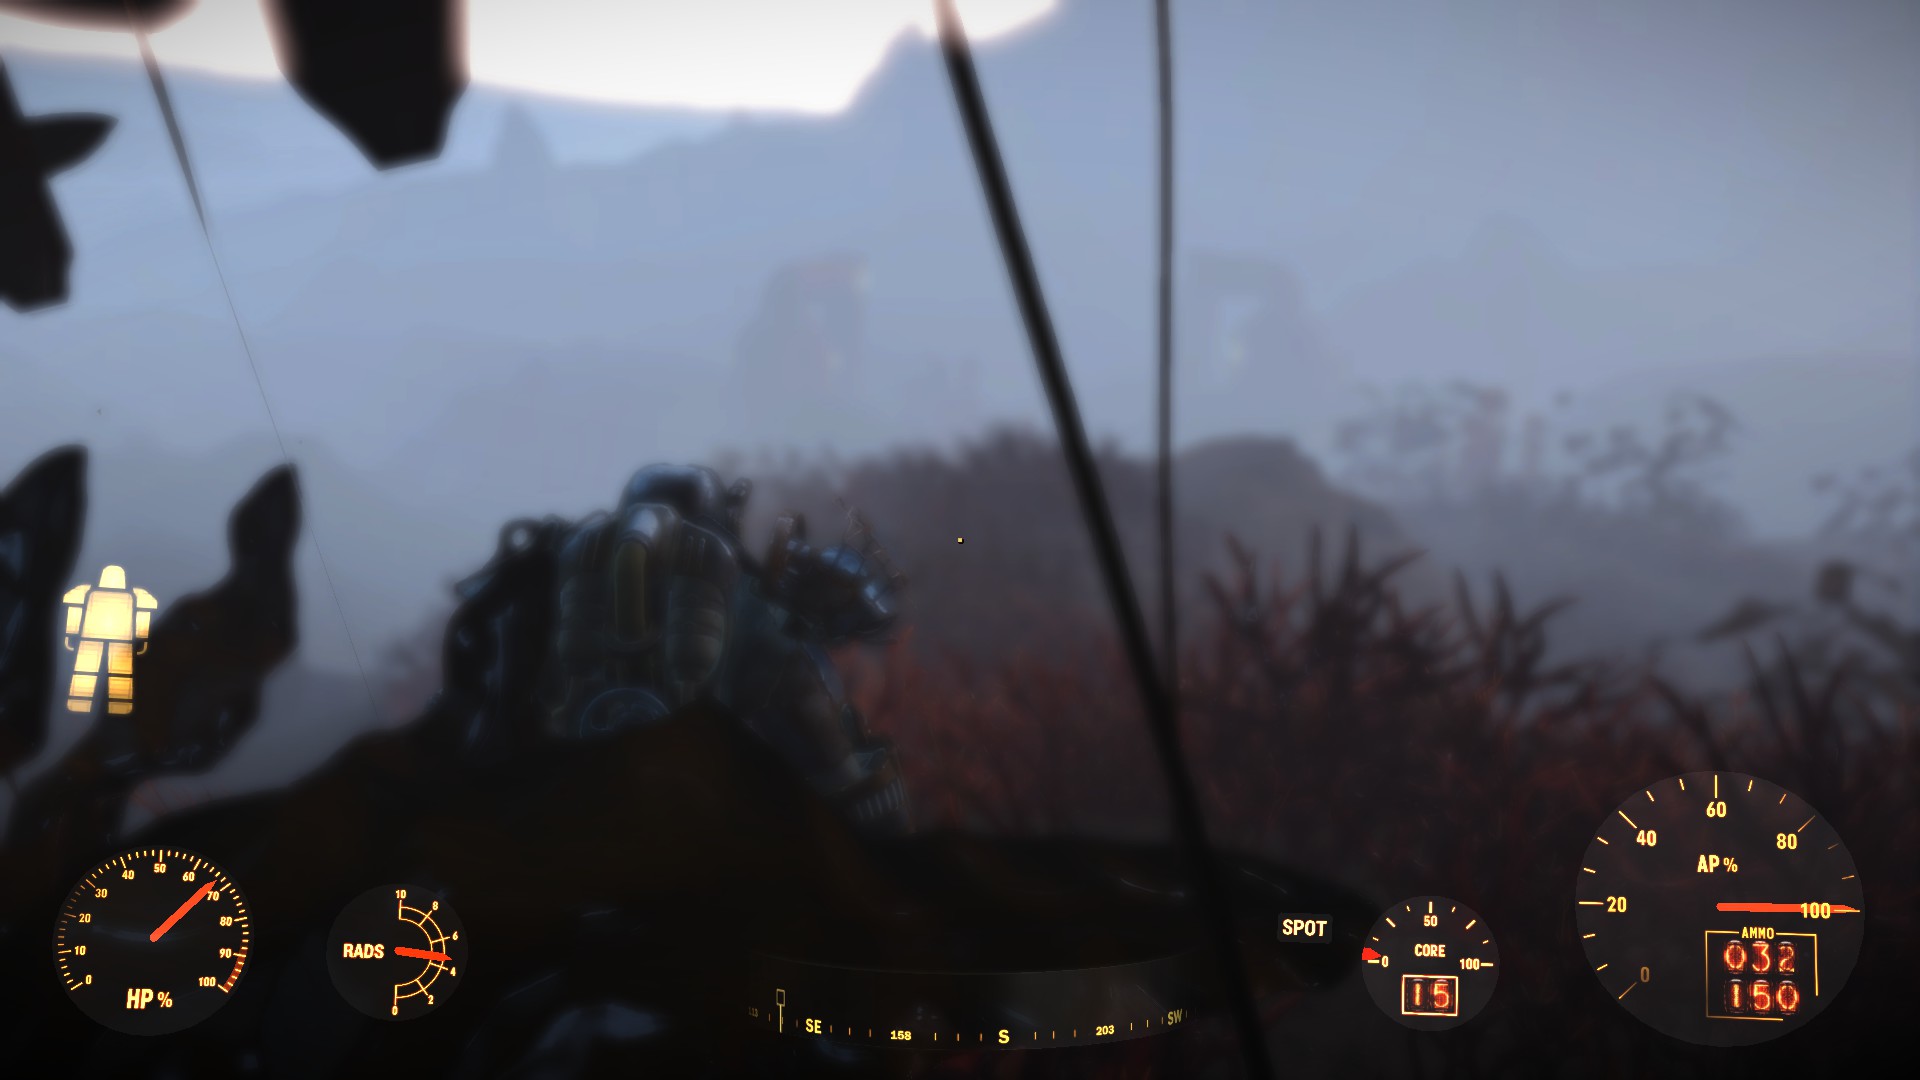 Underwater structures found in Fallout 4